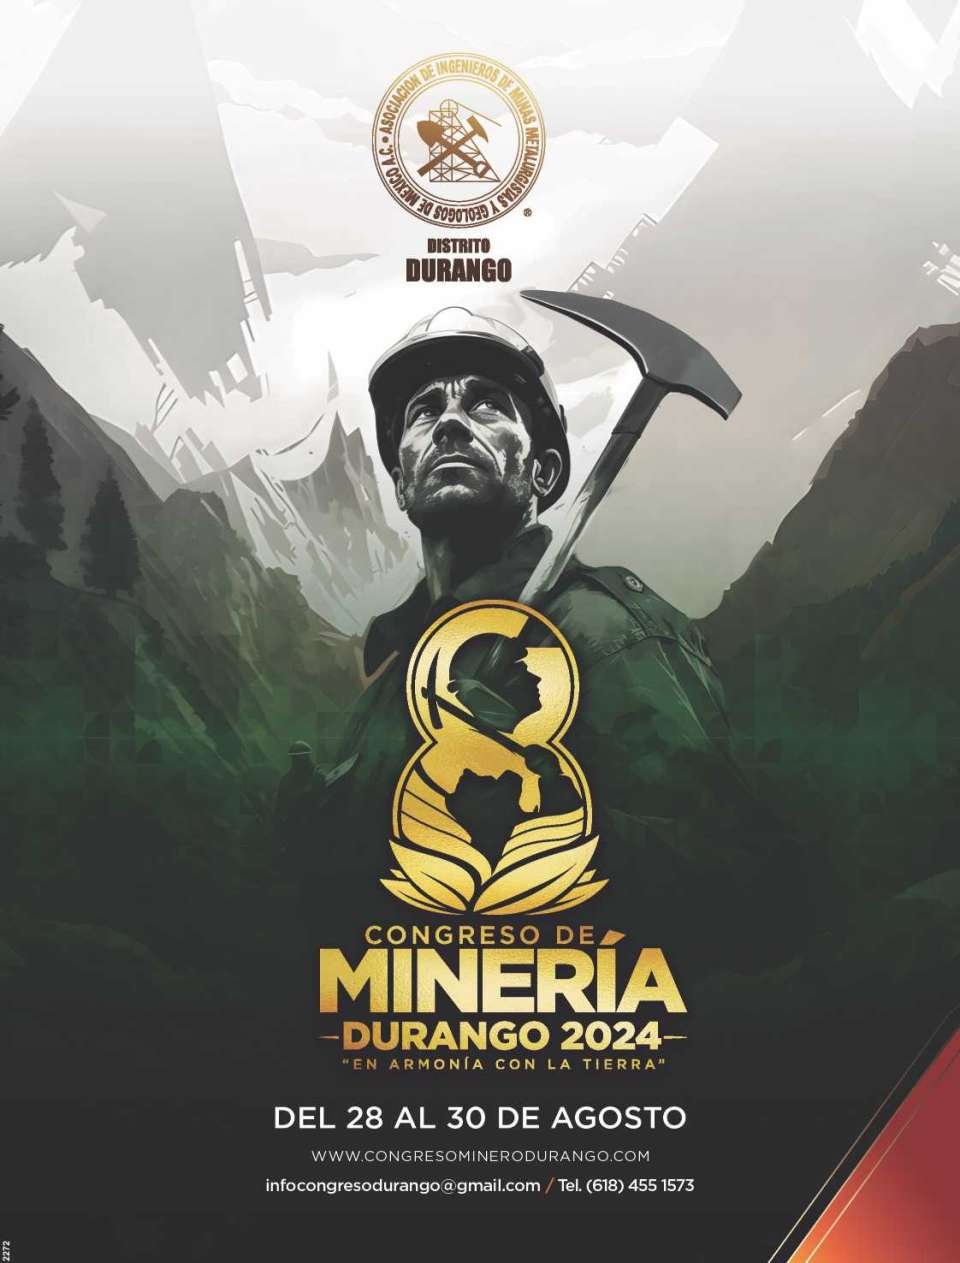 Exhibition and Mining Congress, from August 28 to 30, 2024 in the city of Durango, Mexico.